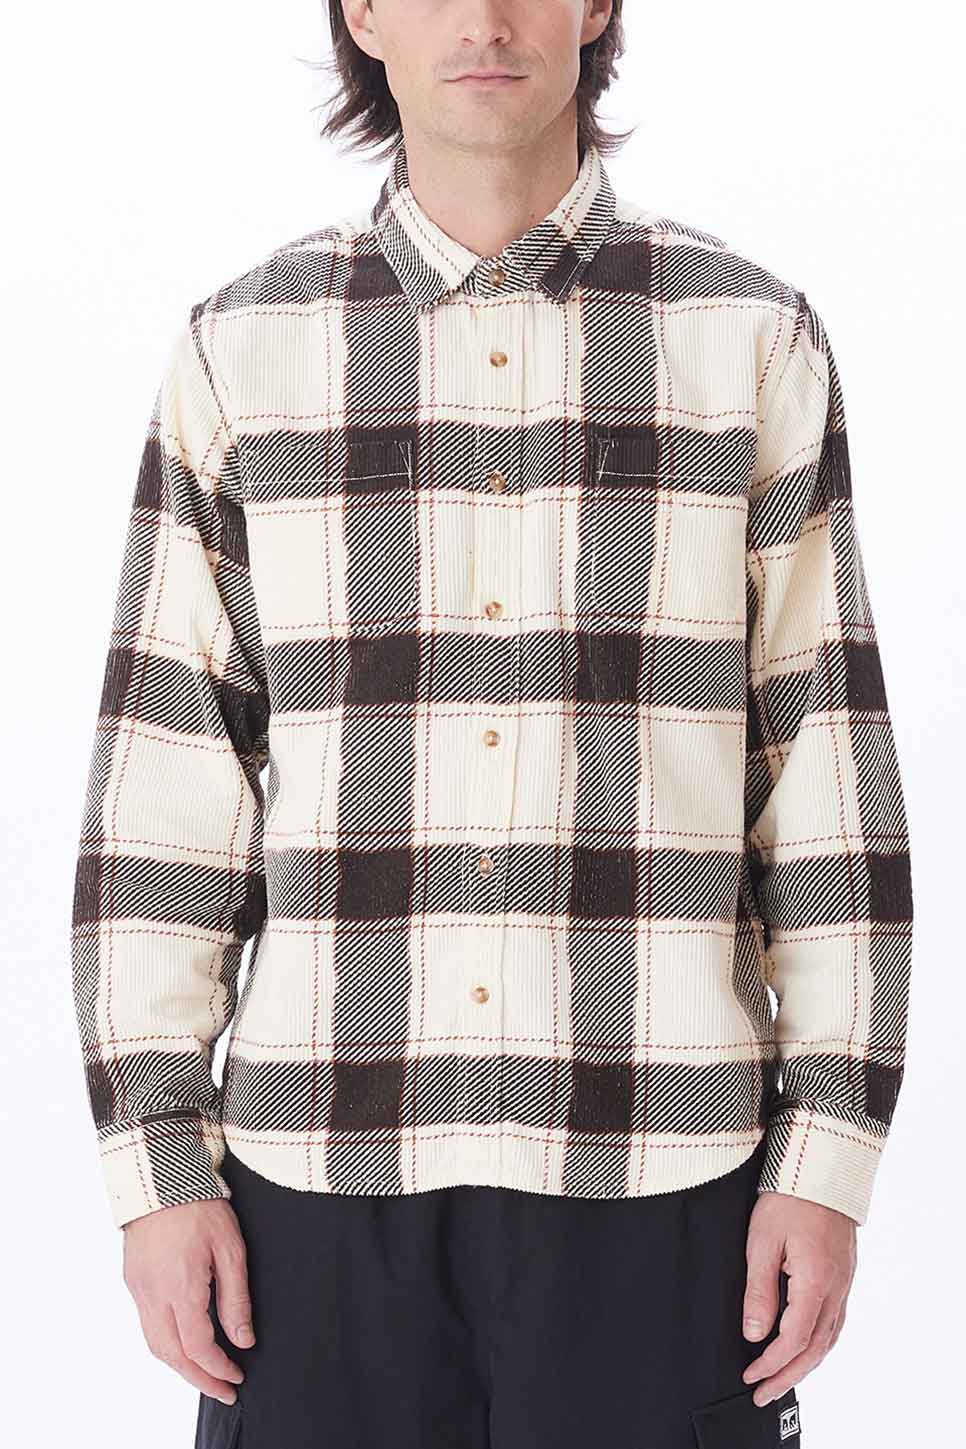 Obey - Adrian Cord Woven - Unbleached Multi - Front